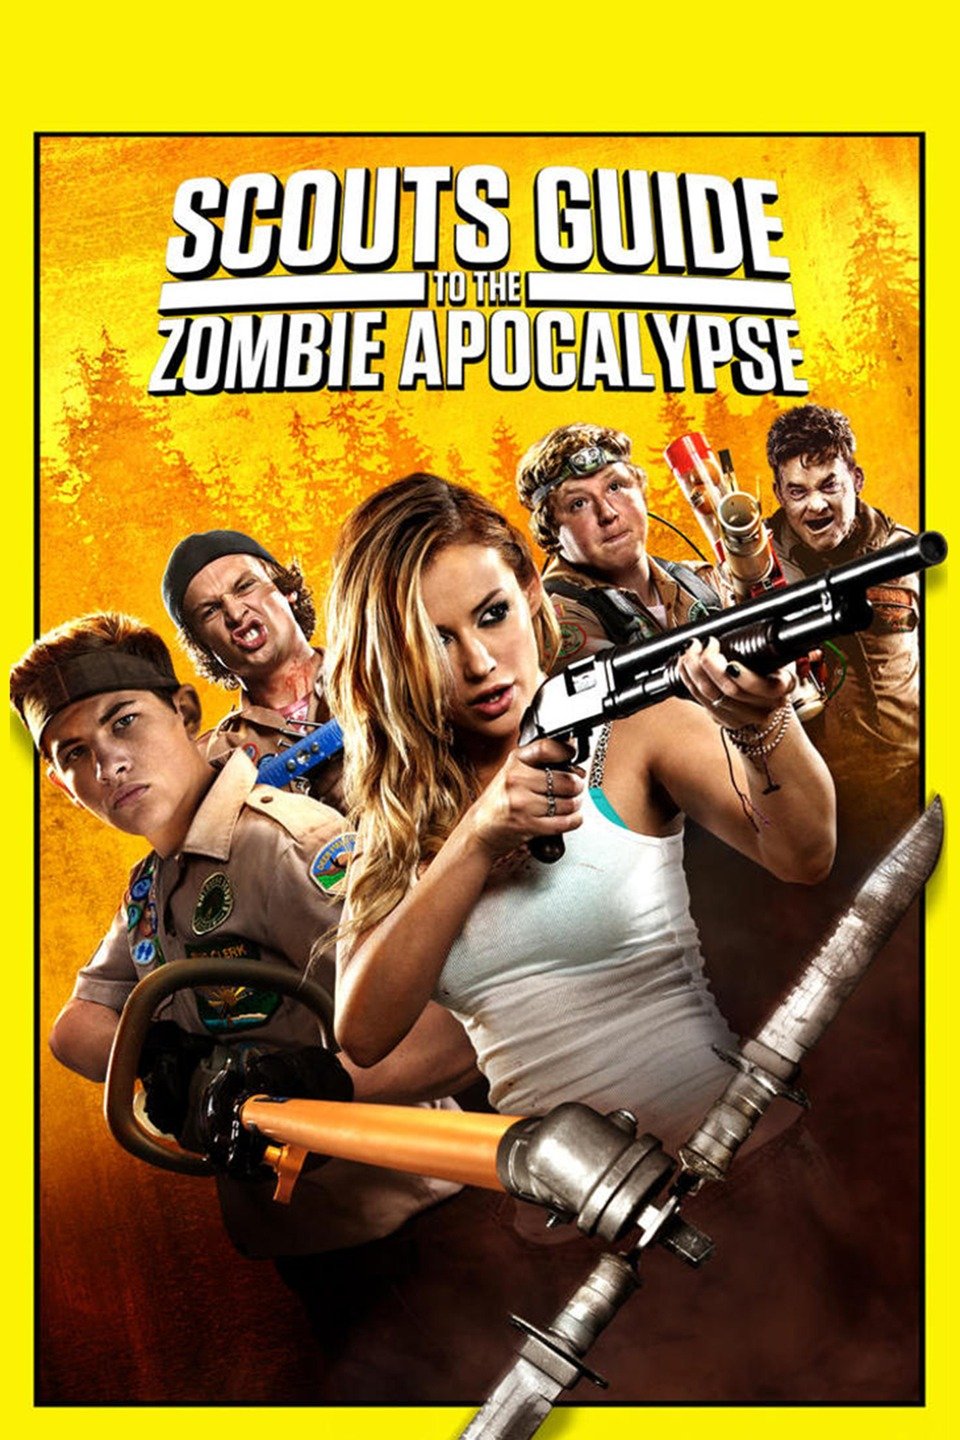 Nude 3gp Sex Video - Scouts Guide to the Zombie Apocalypse - Rotten Tomatoes